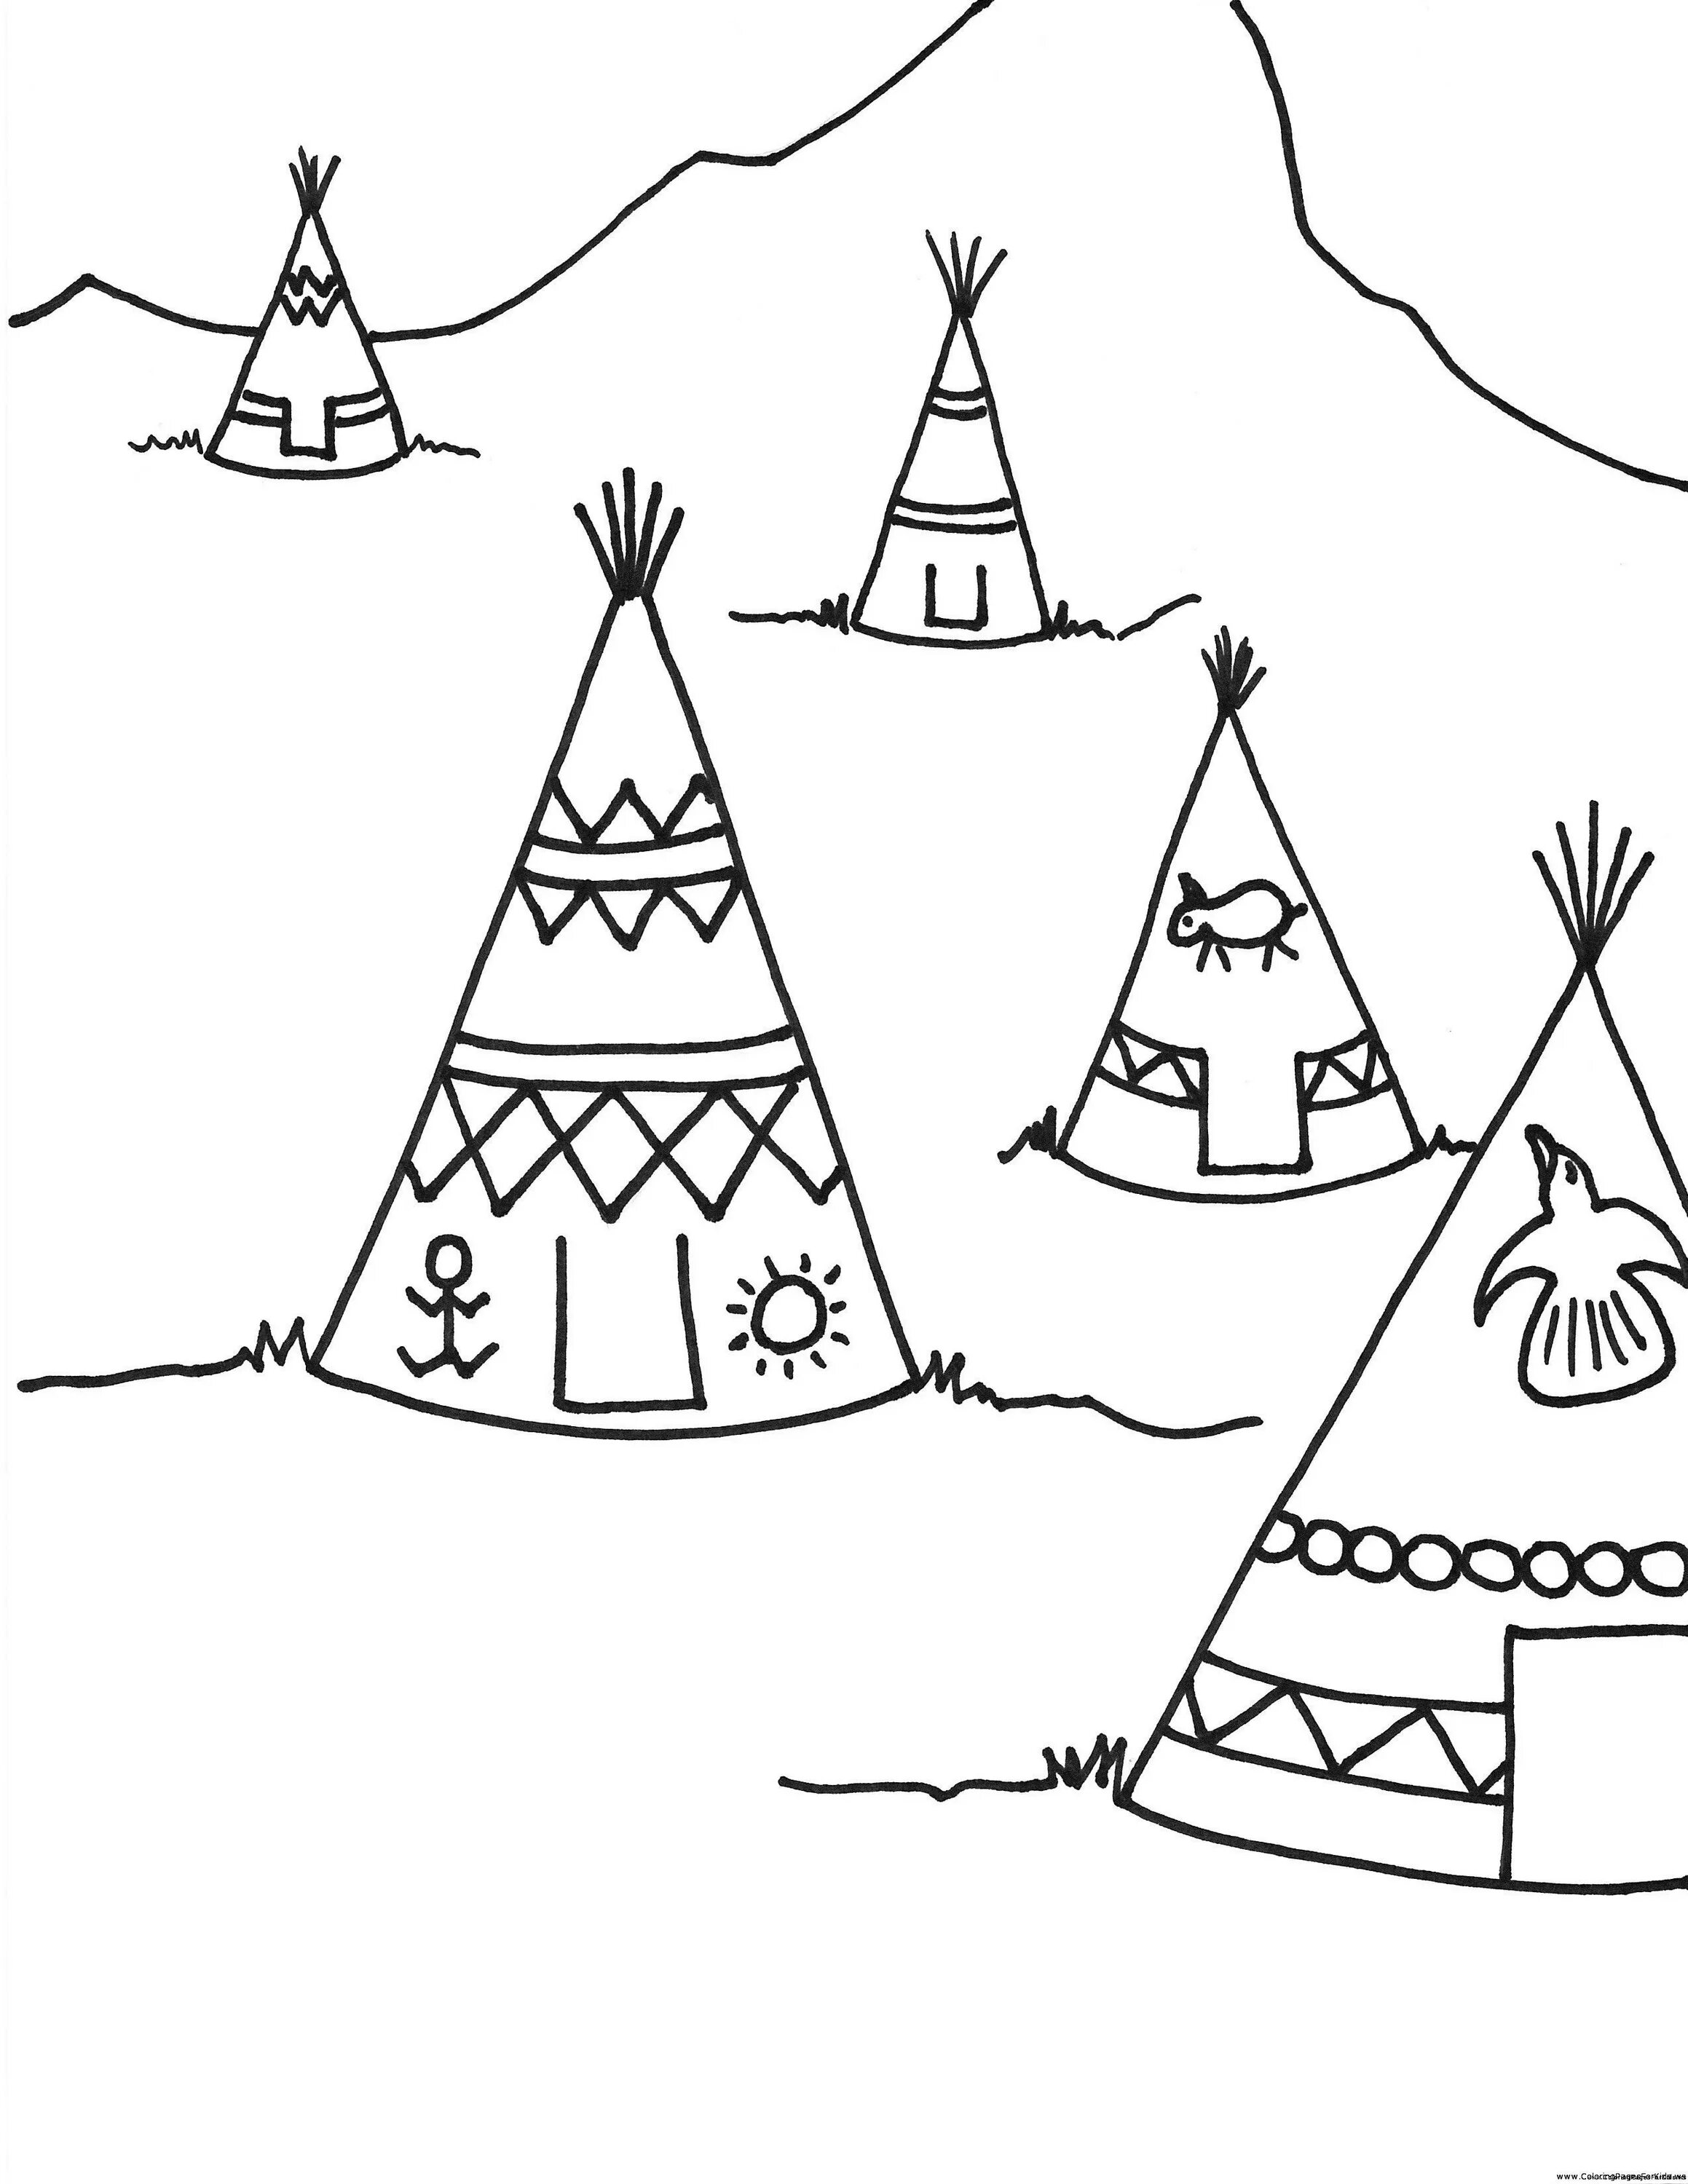 Blessed Sami coloring pages for kids